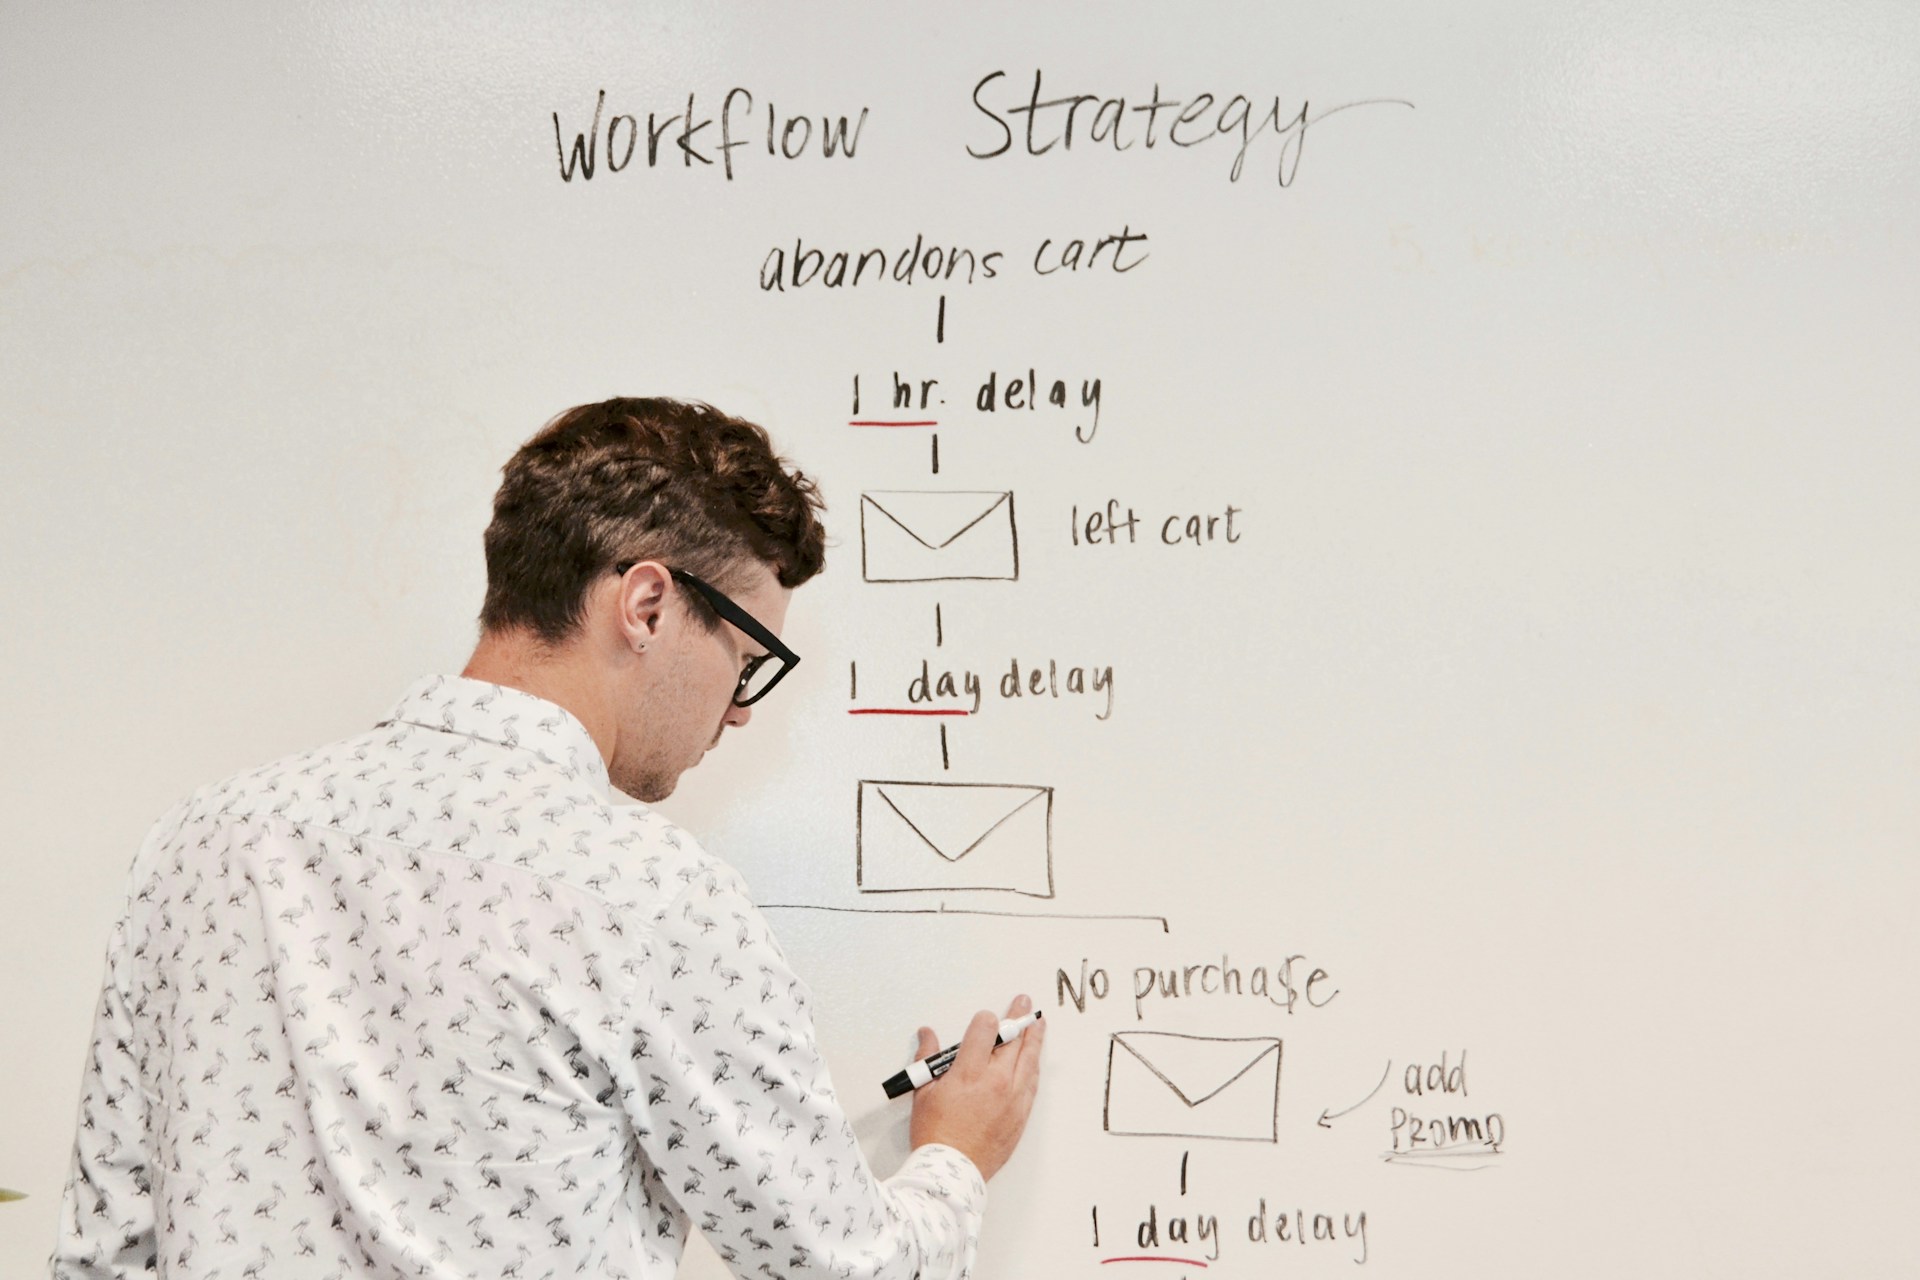 Email campaign planned by a man in-front of a whiteboard